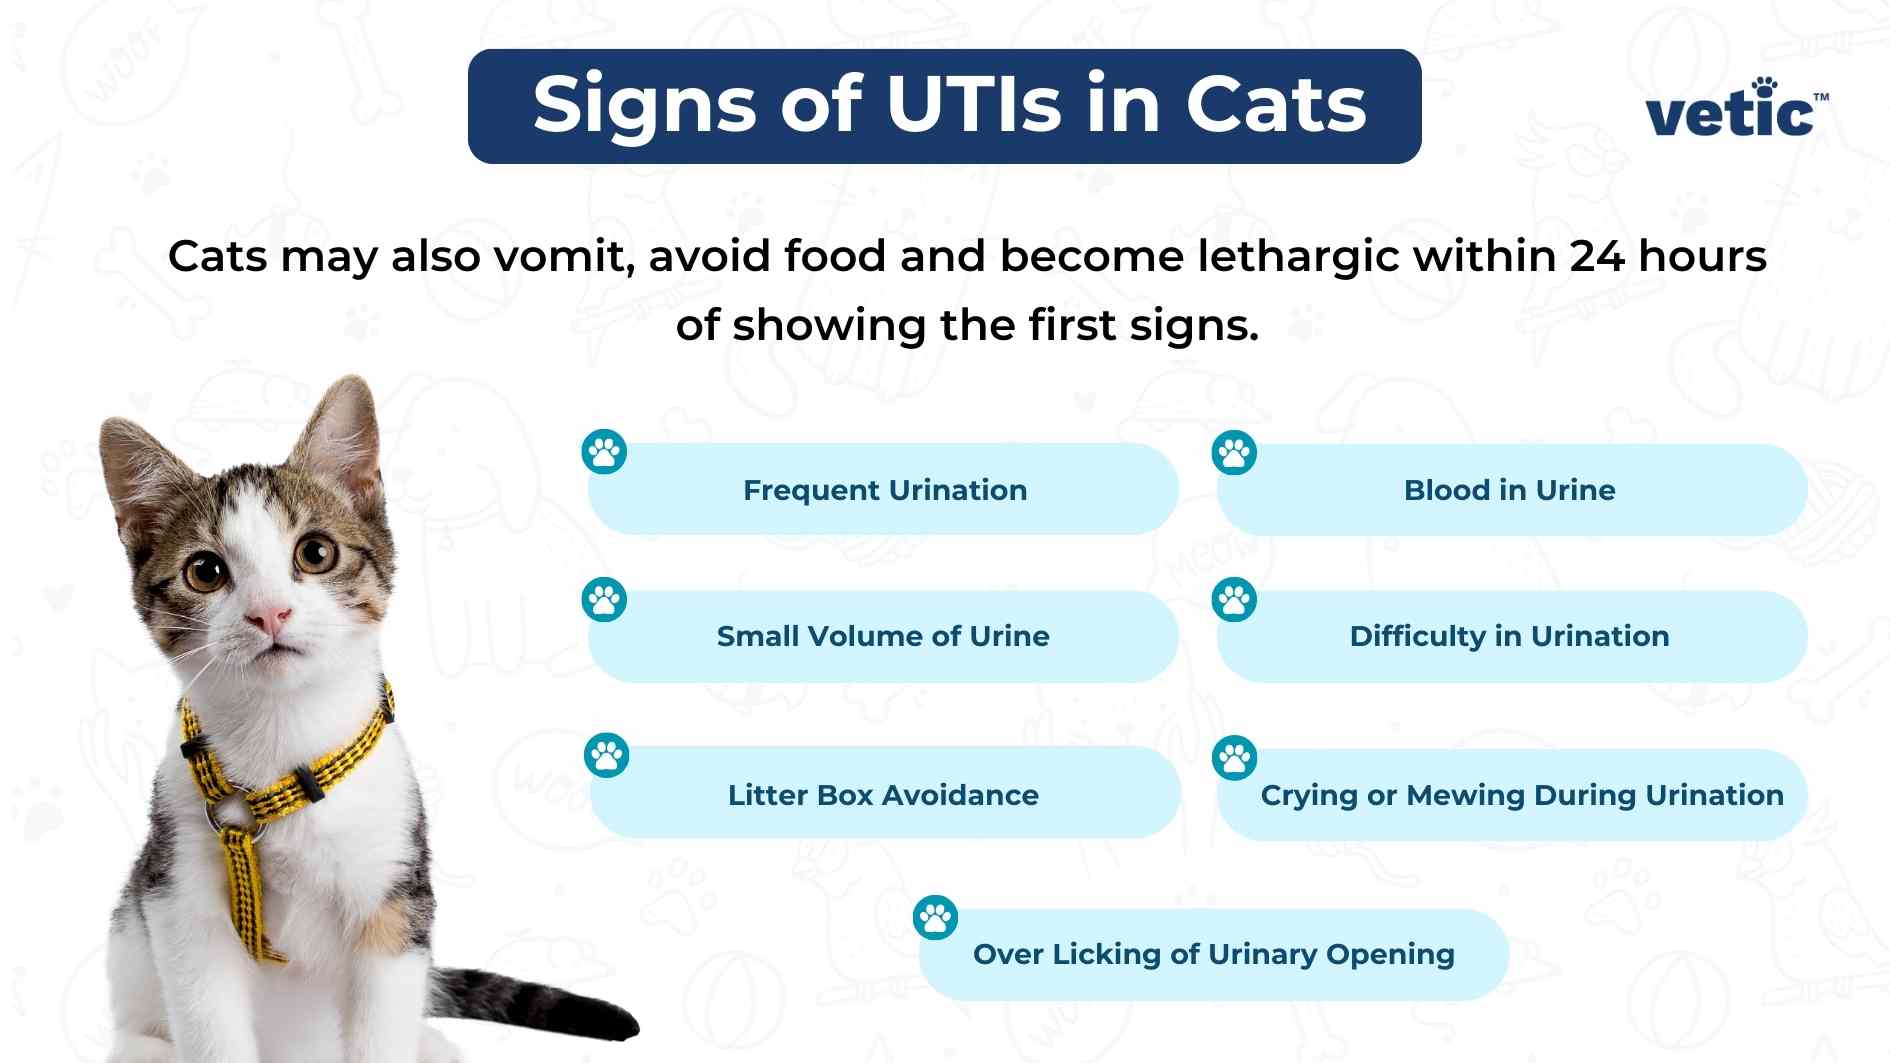 Infographic on the Signs of UTI in cats - these signs include - Frequent Urination Small Volume of Urine Litter Box Avoidance Blood in Urine Difficulty in Urination Crying or Mewing During Urination Over Licking of Urinary Opening Cats may also vomit, avoid food and become lethargic within 24 hours of showing the first signs.